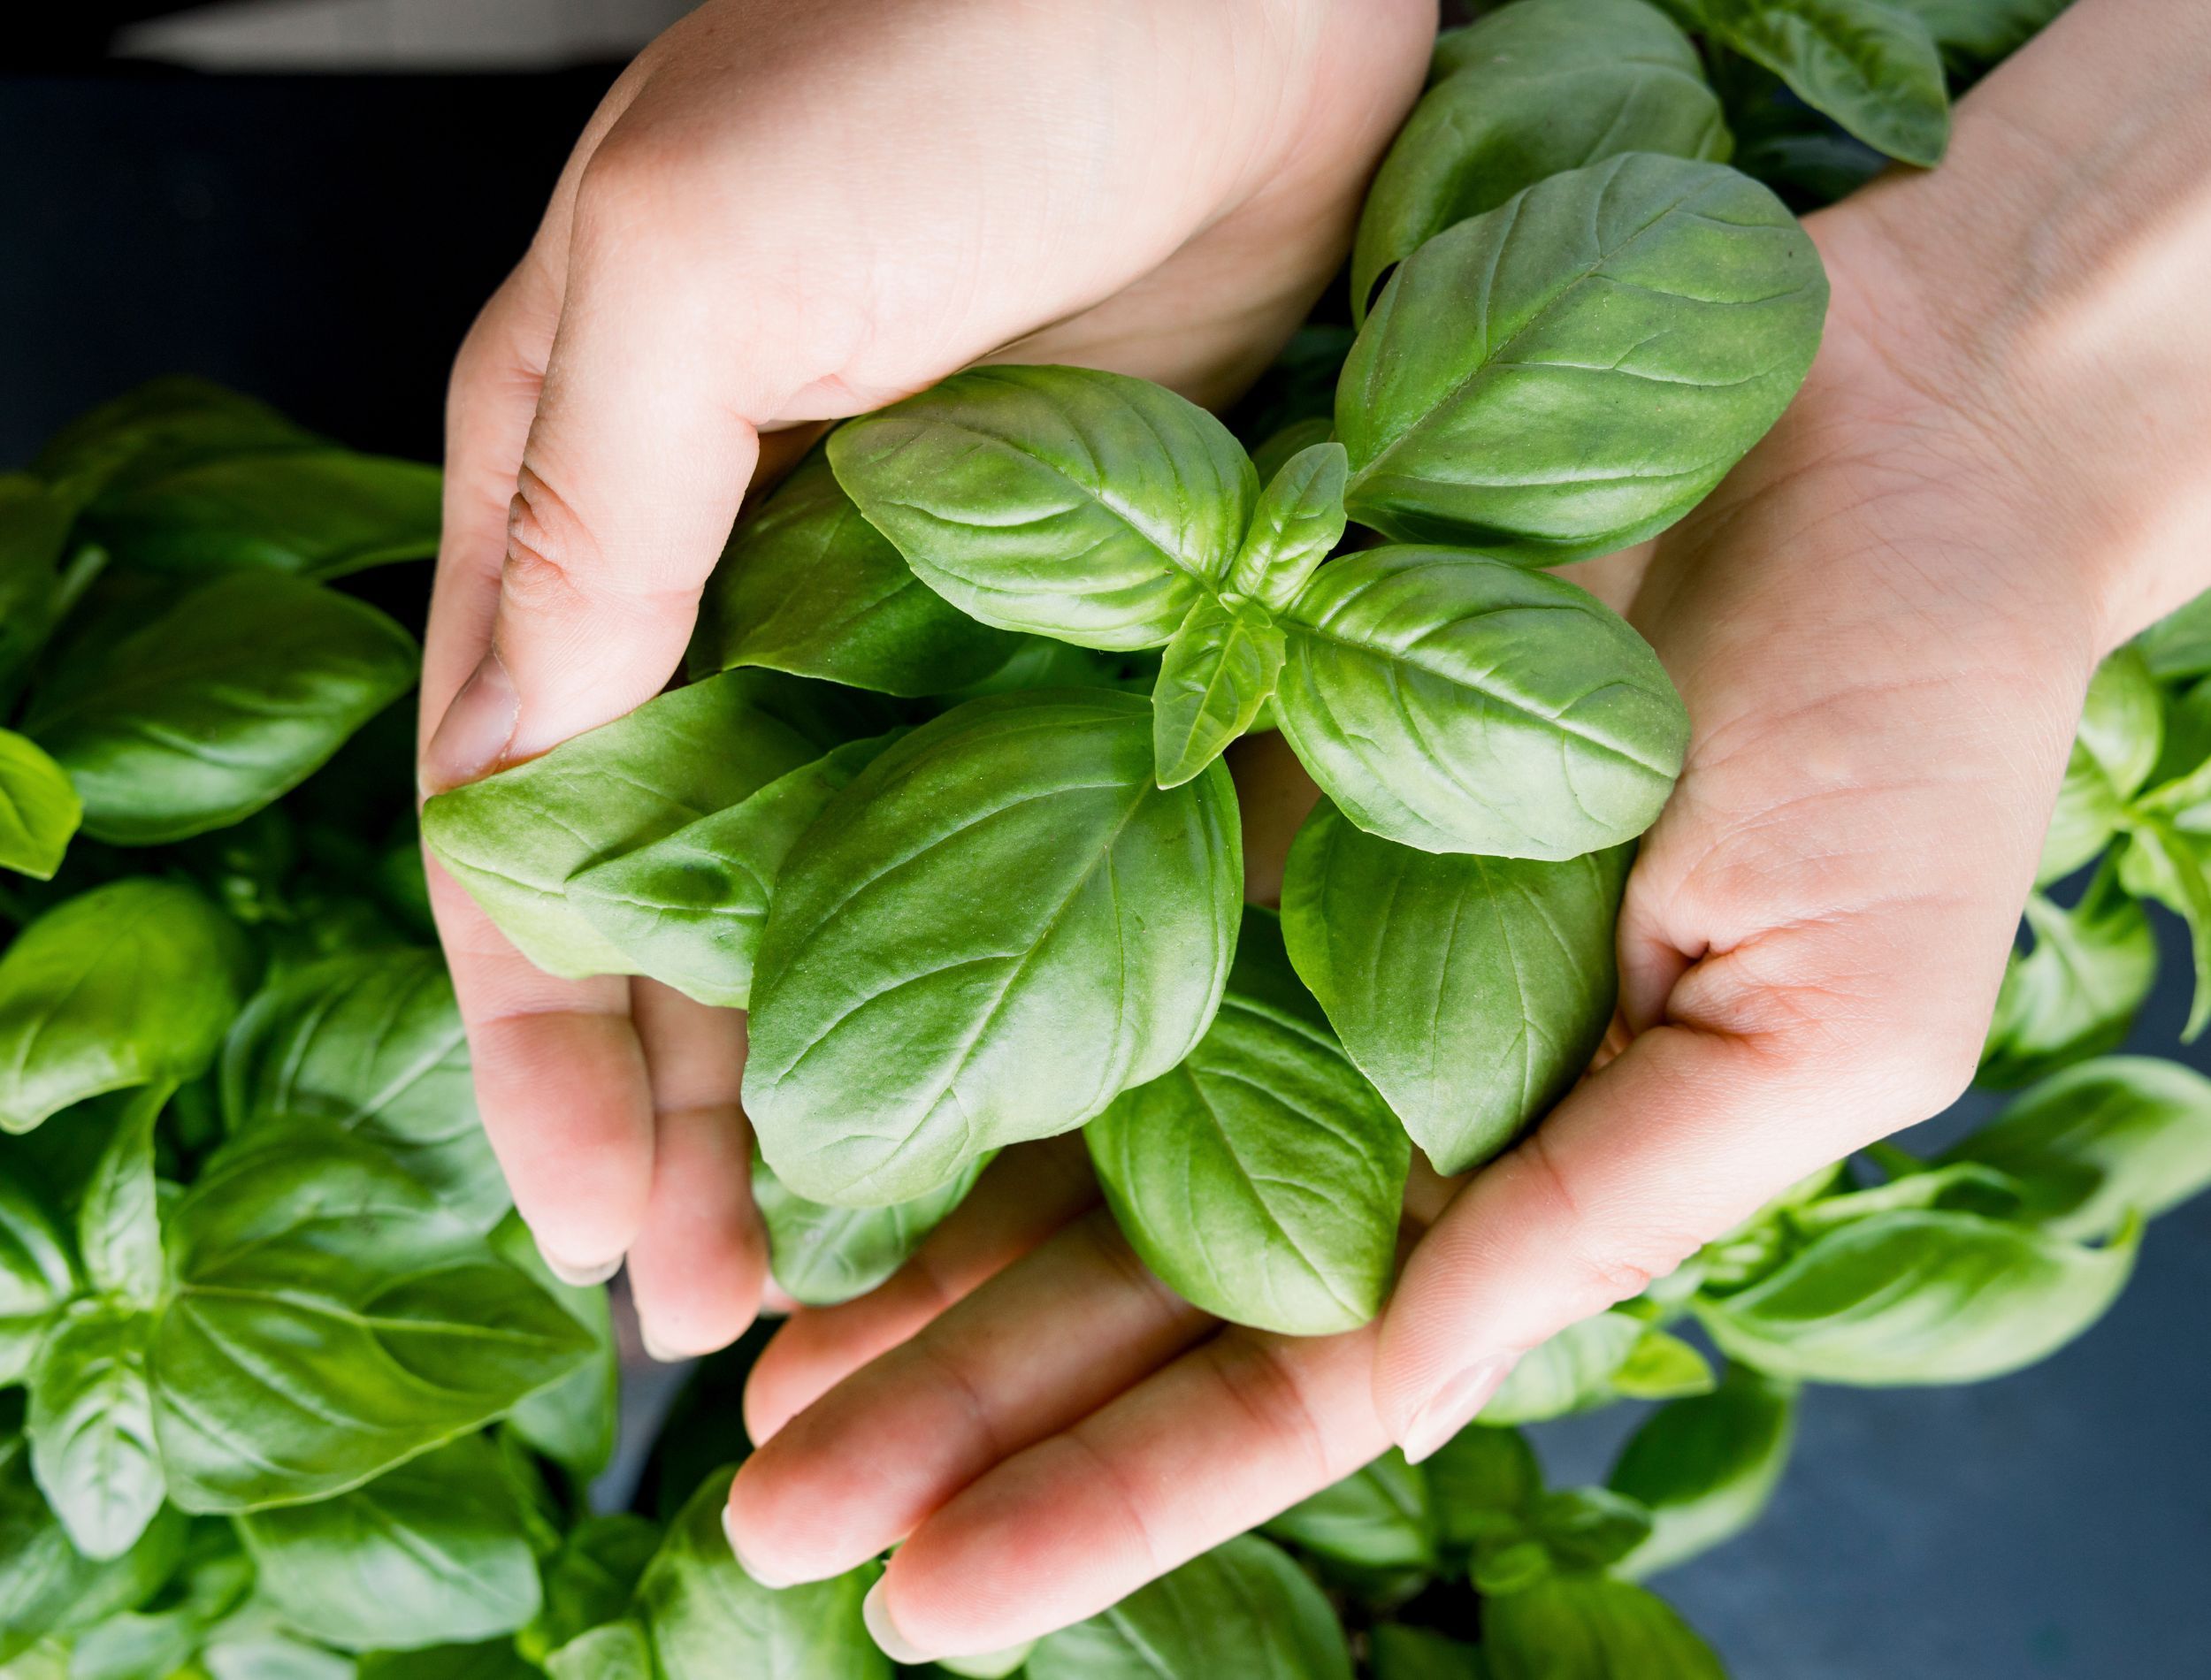 Hands holding fresh basil leaves from an herb garden